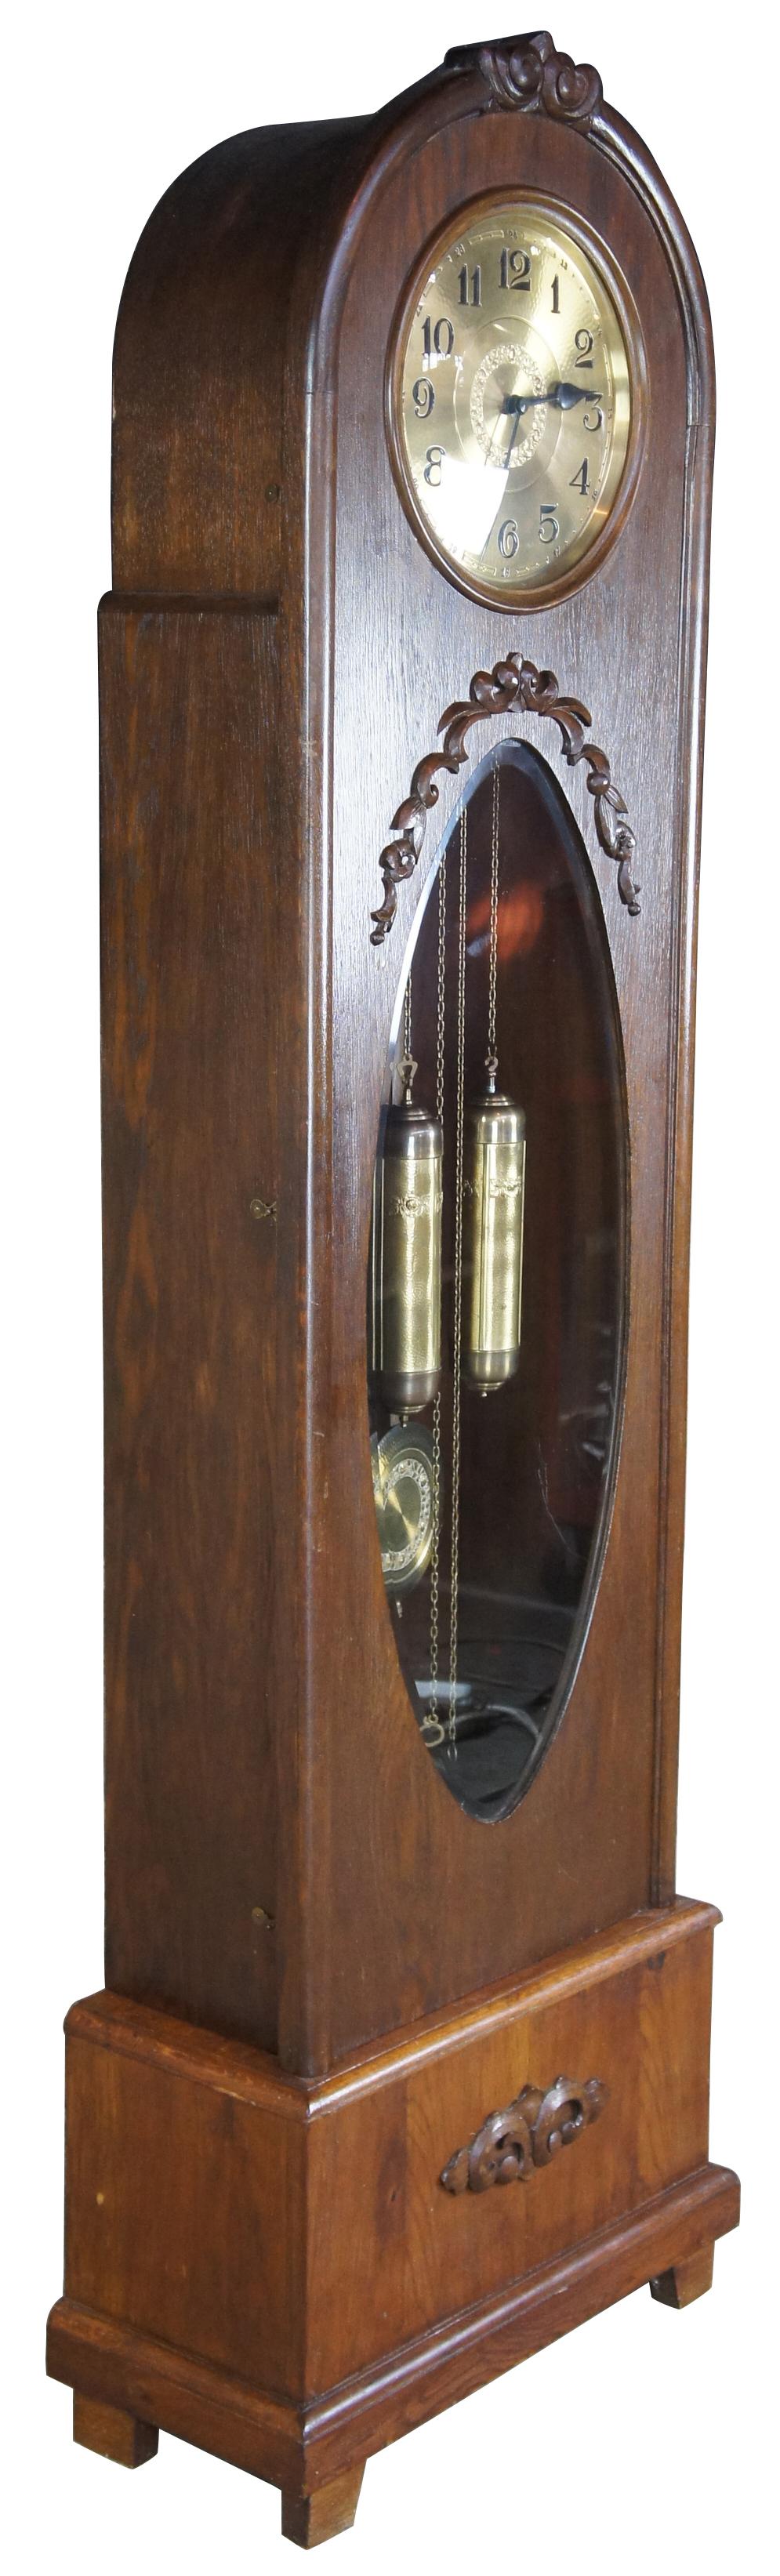 Art Deco German grandfather clock by Kieninger. This tall case clock has an oak wooden case with a round bonnet, and a plinth base featuring an appliqued foliate motif rising on squared feet. The front of the clock has an oval glass door with arched